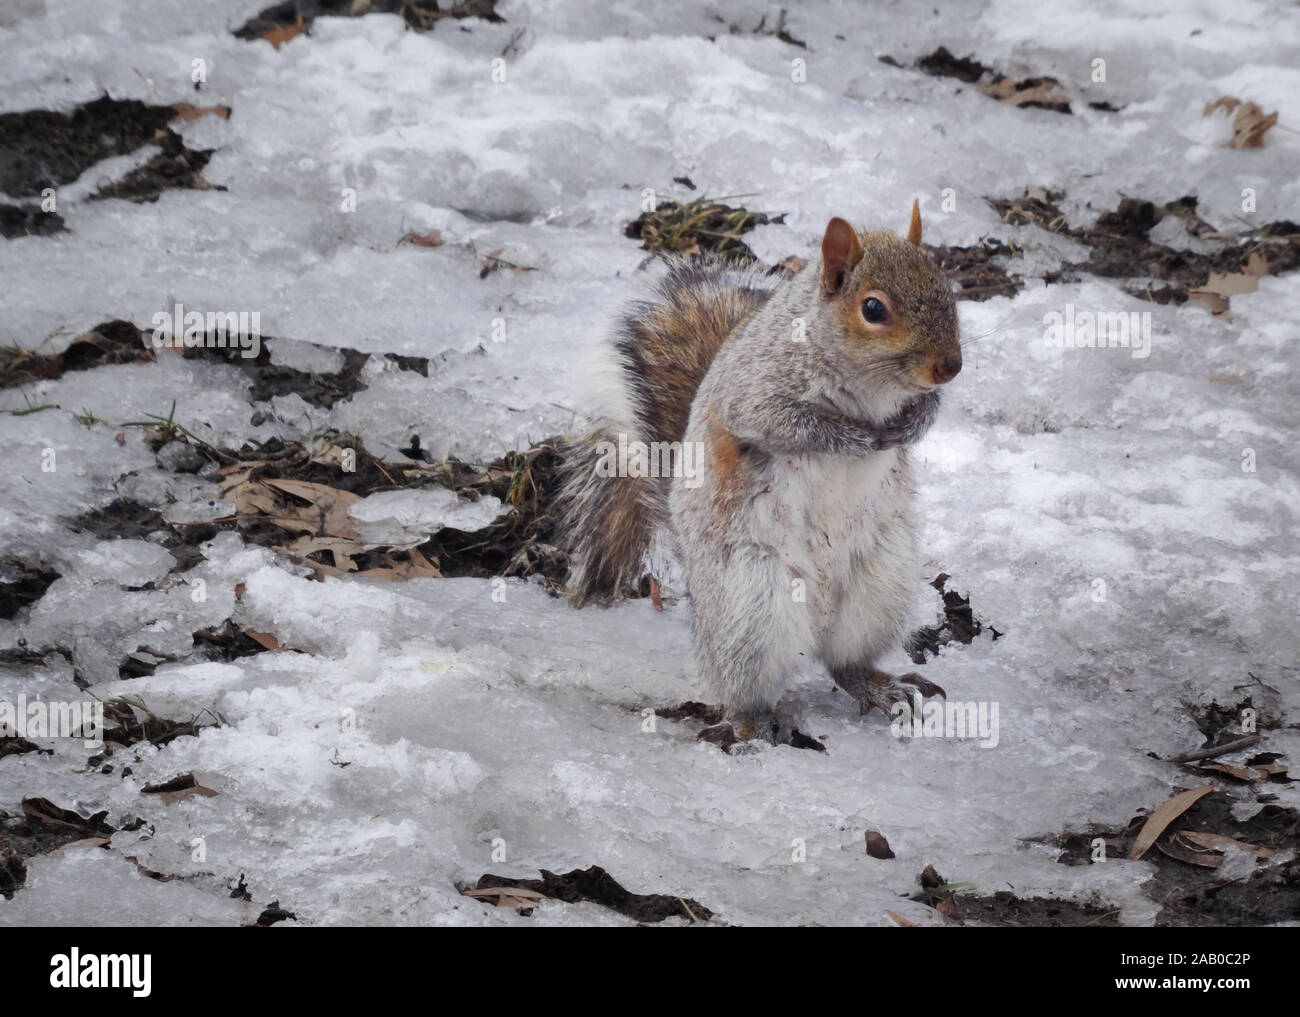 Grey squirrel in winter scene looking shy and begging for food, shot in Central Park, New York. Ice and snow visible, daytime shot. Stock Photo